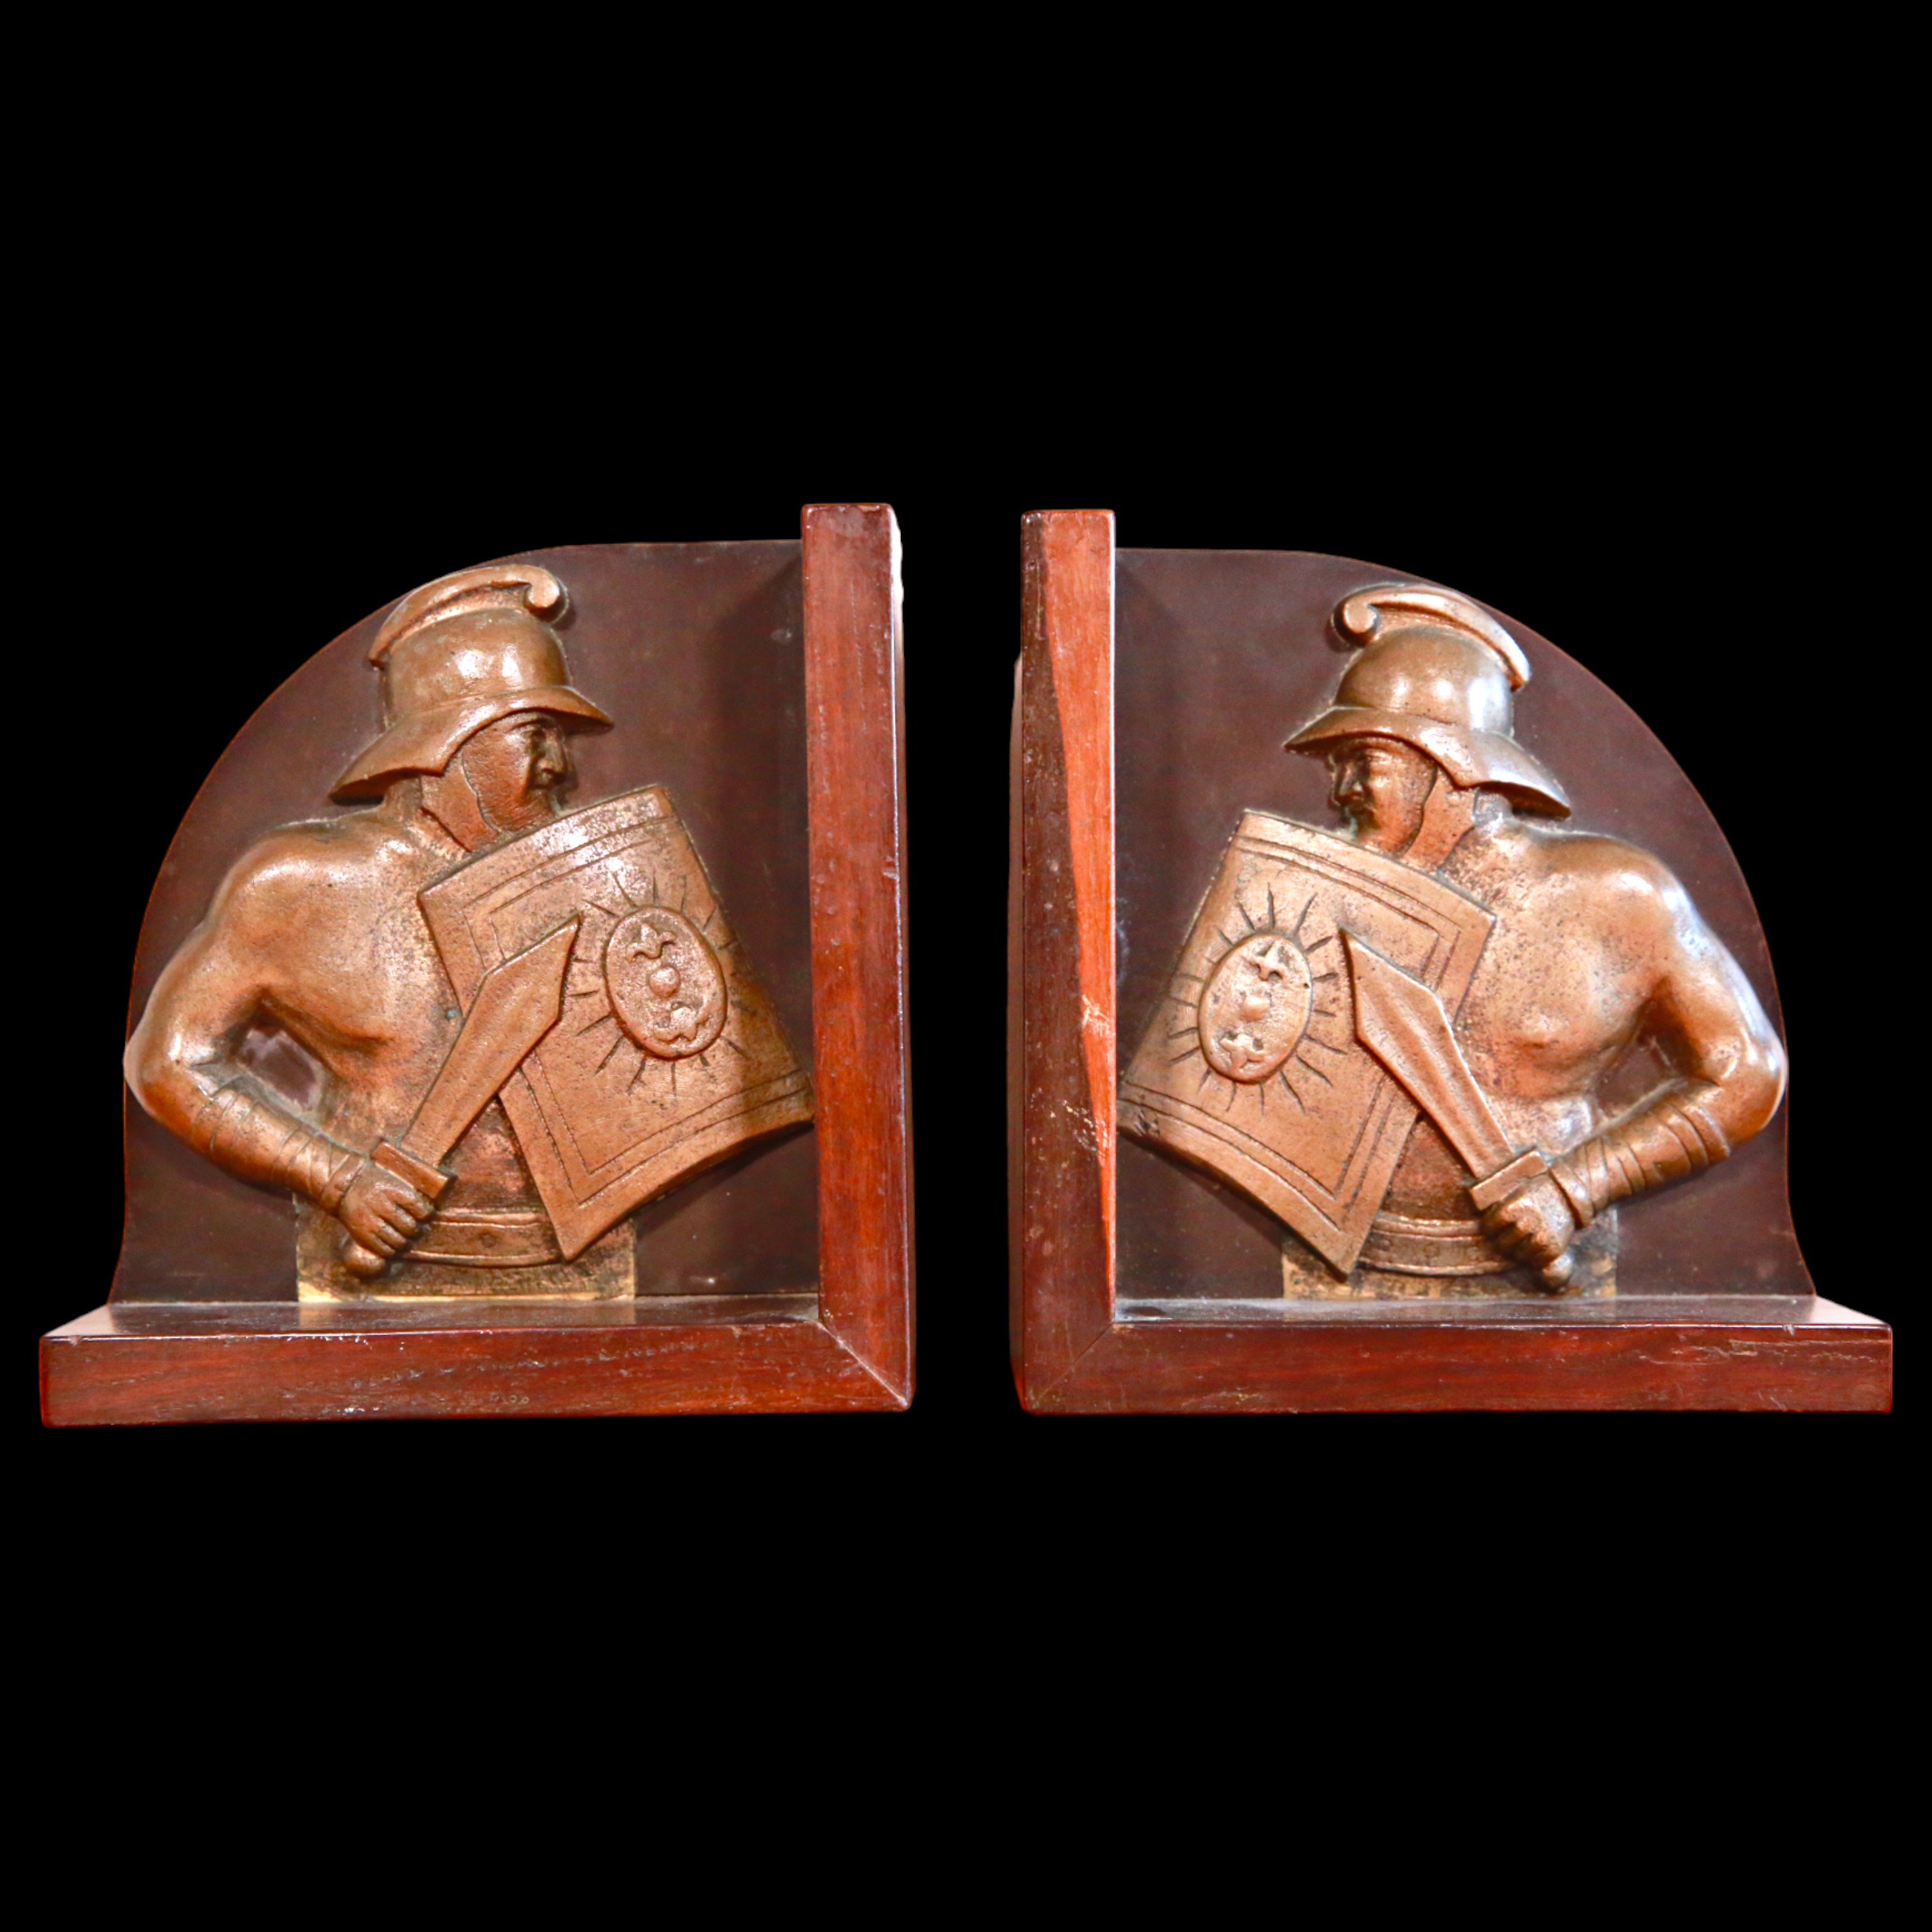 Vintage two wooden book supports, decorated with images of gladiators, 1930s, Italy.